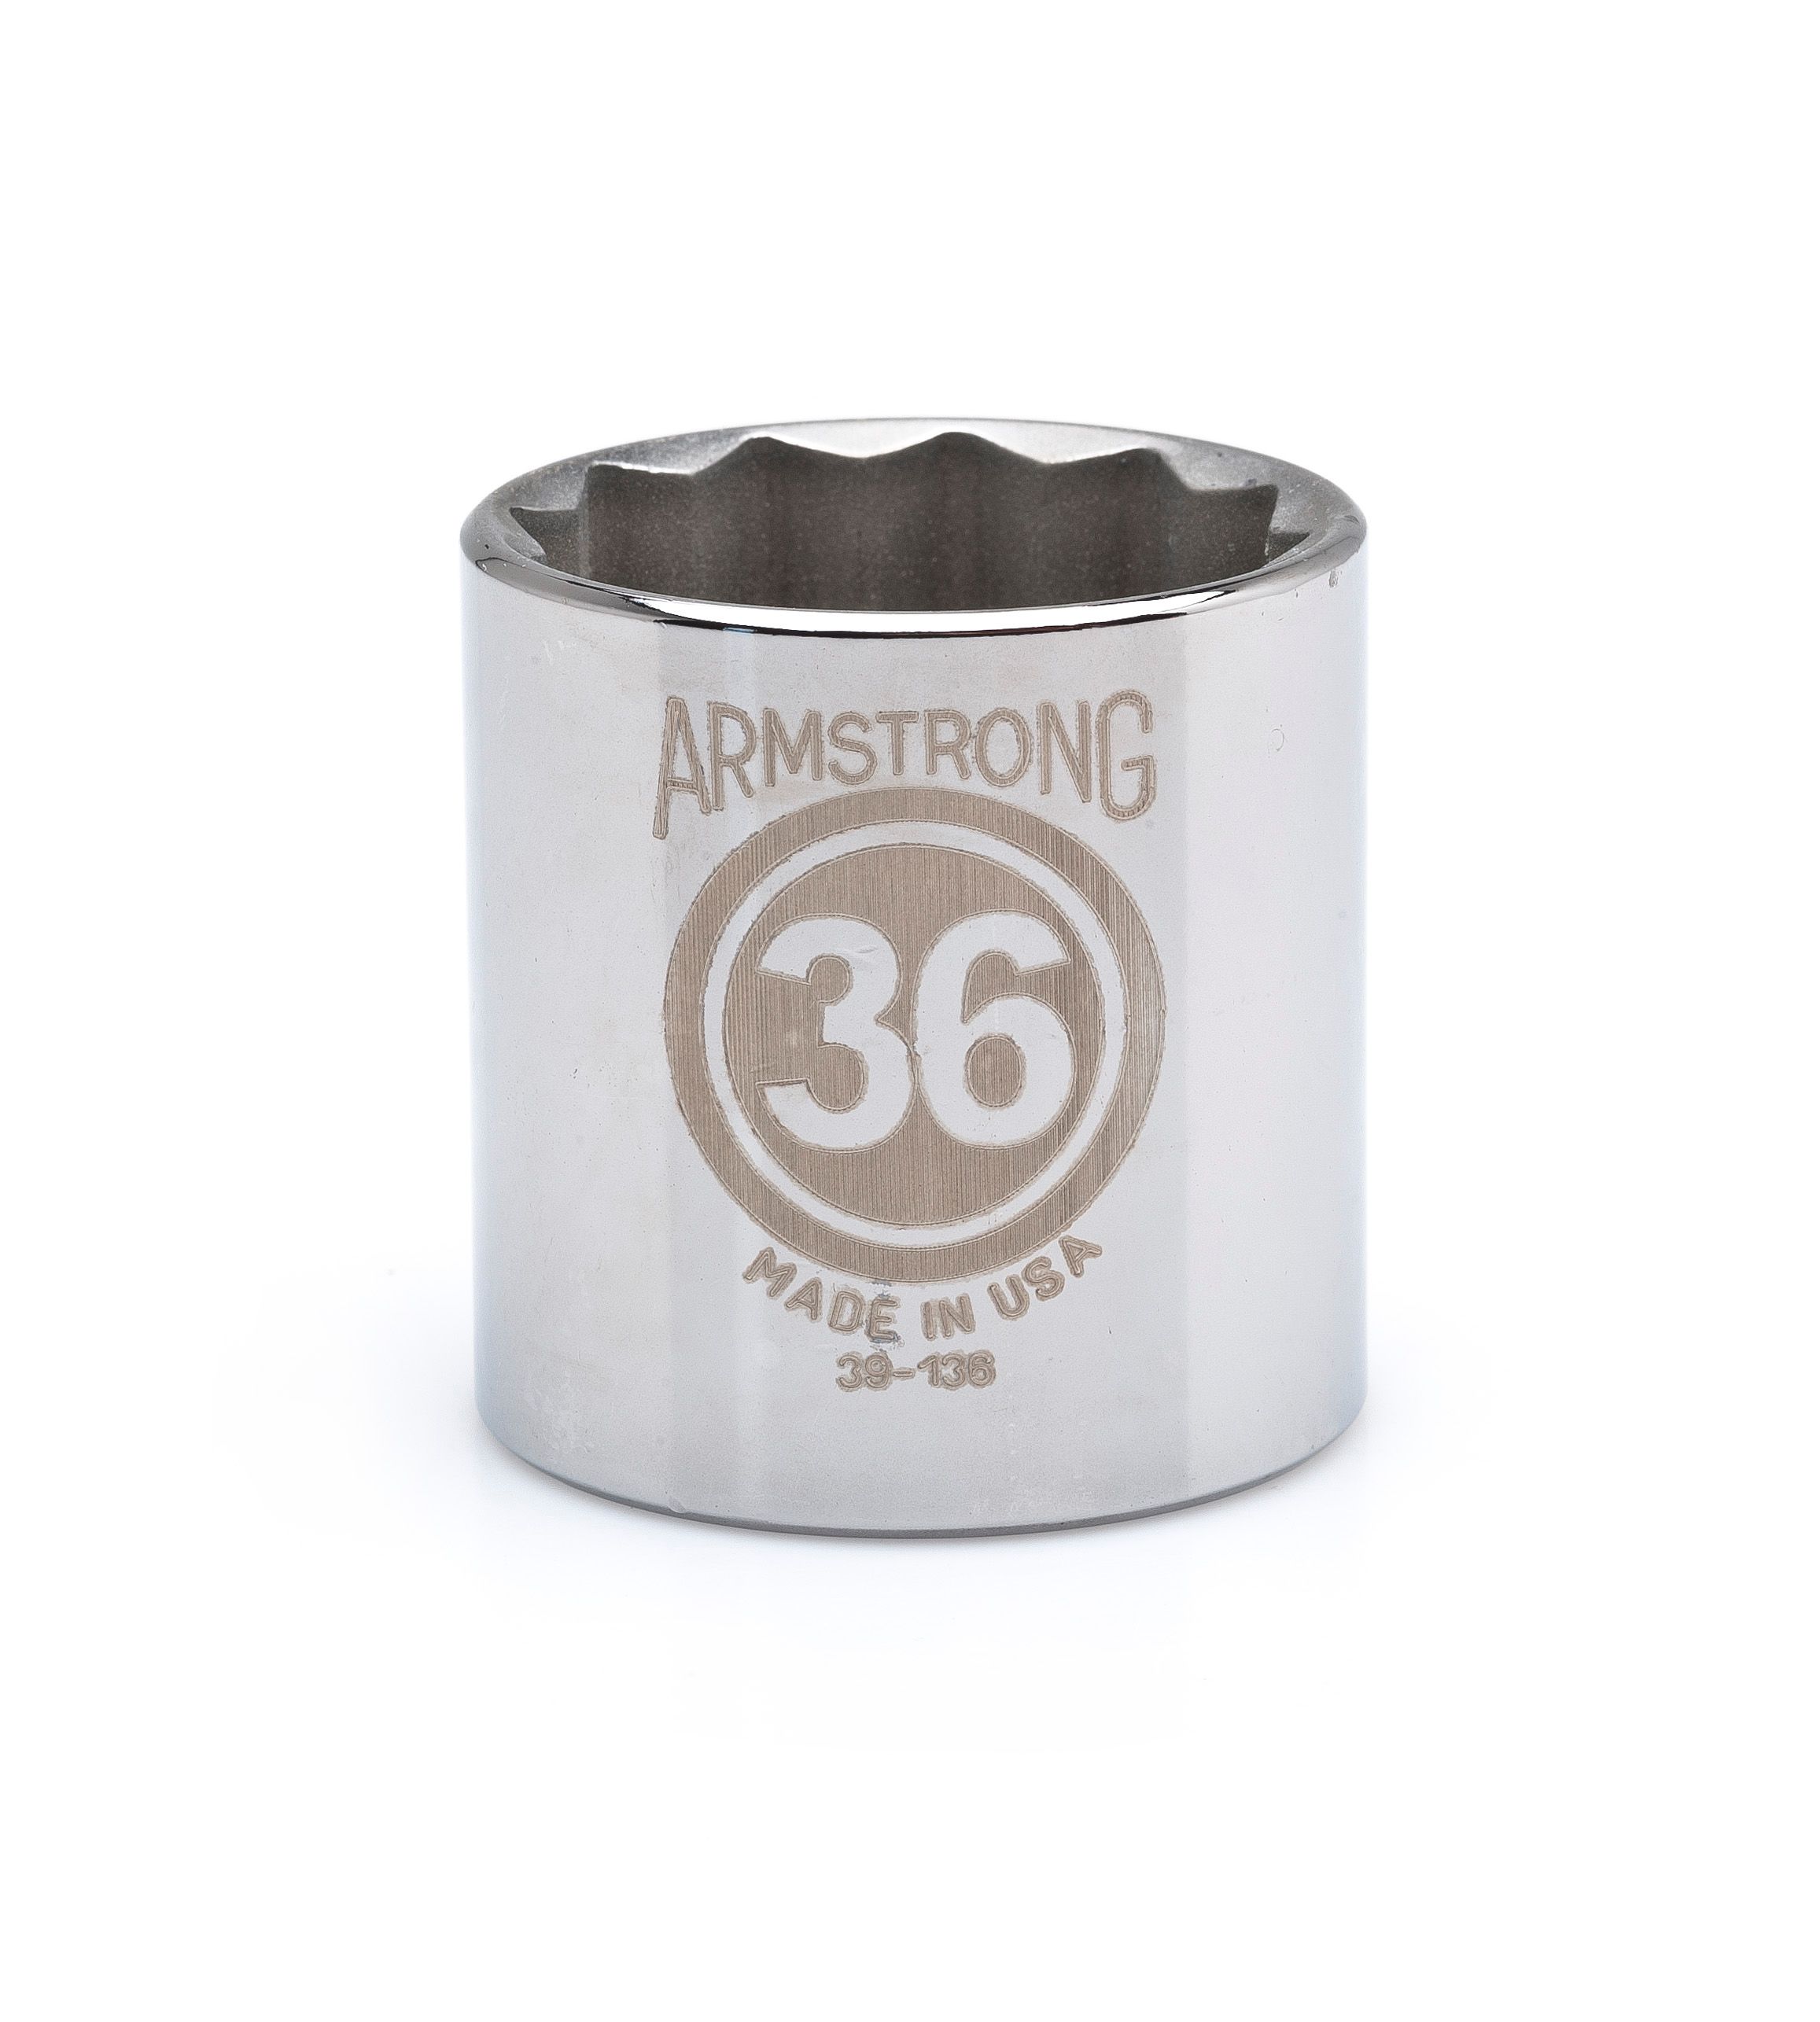 Armstrong Tools 23 mm socket, 12 pt. Standard 1/2 in. drive